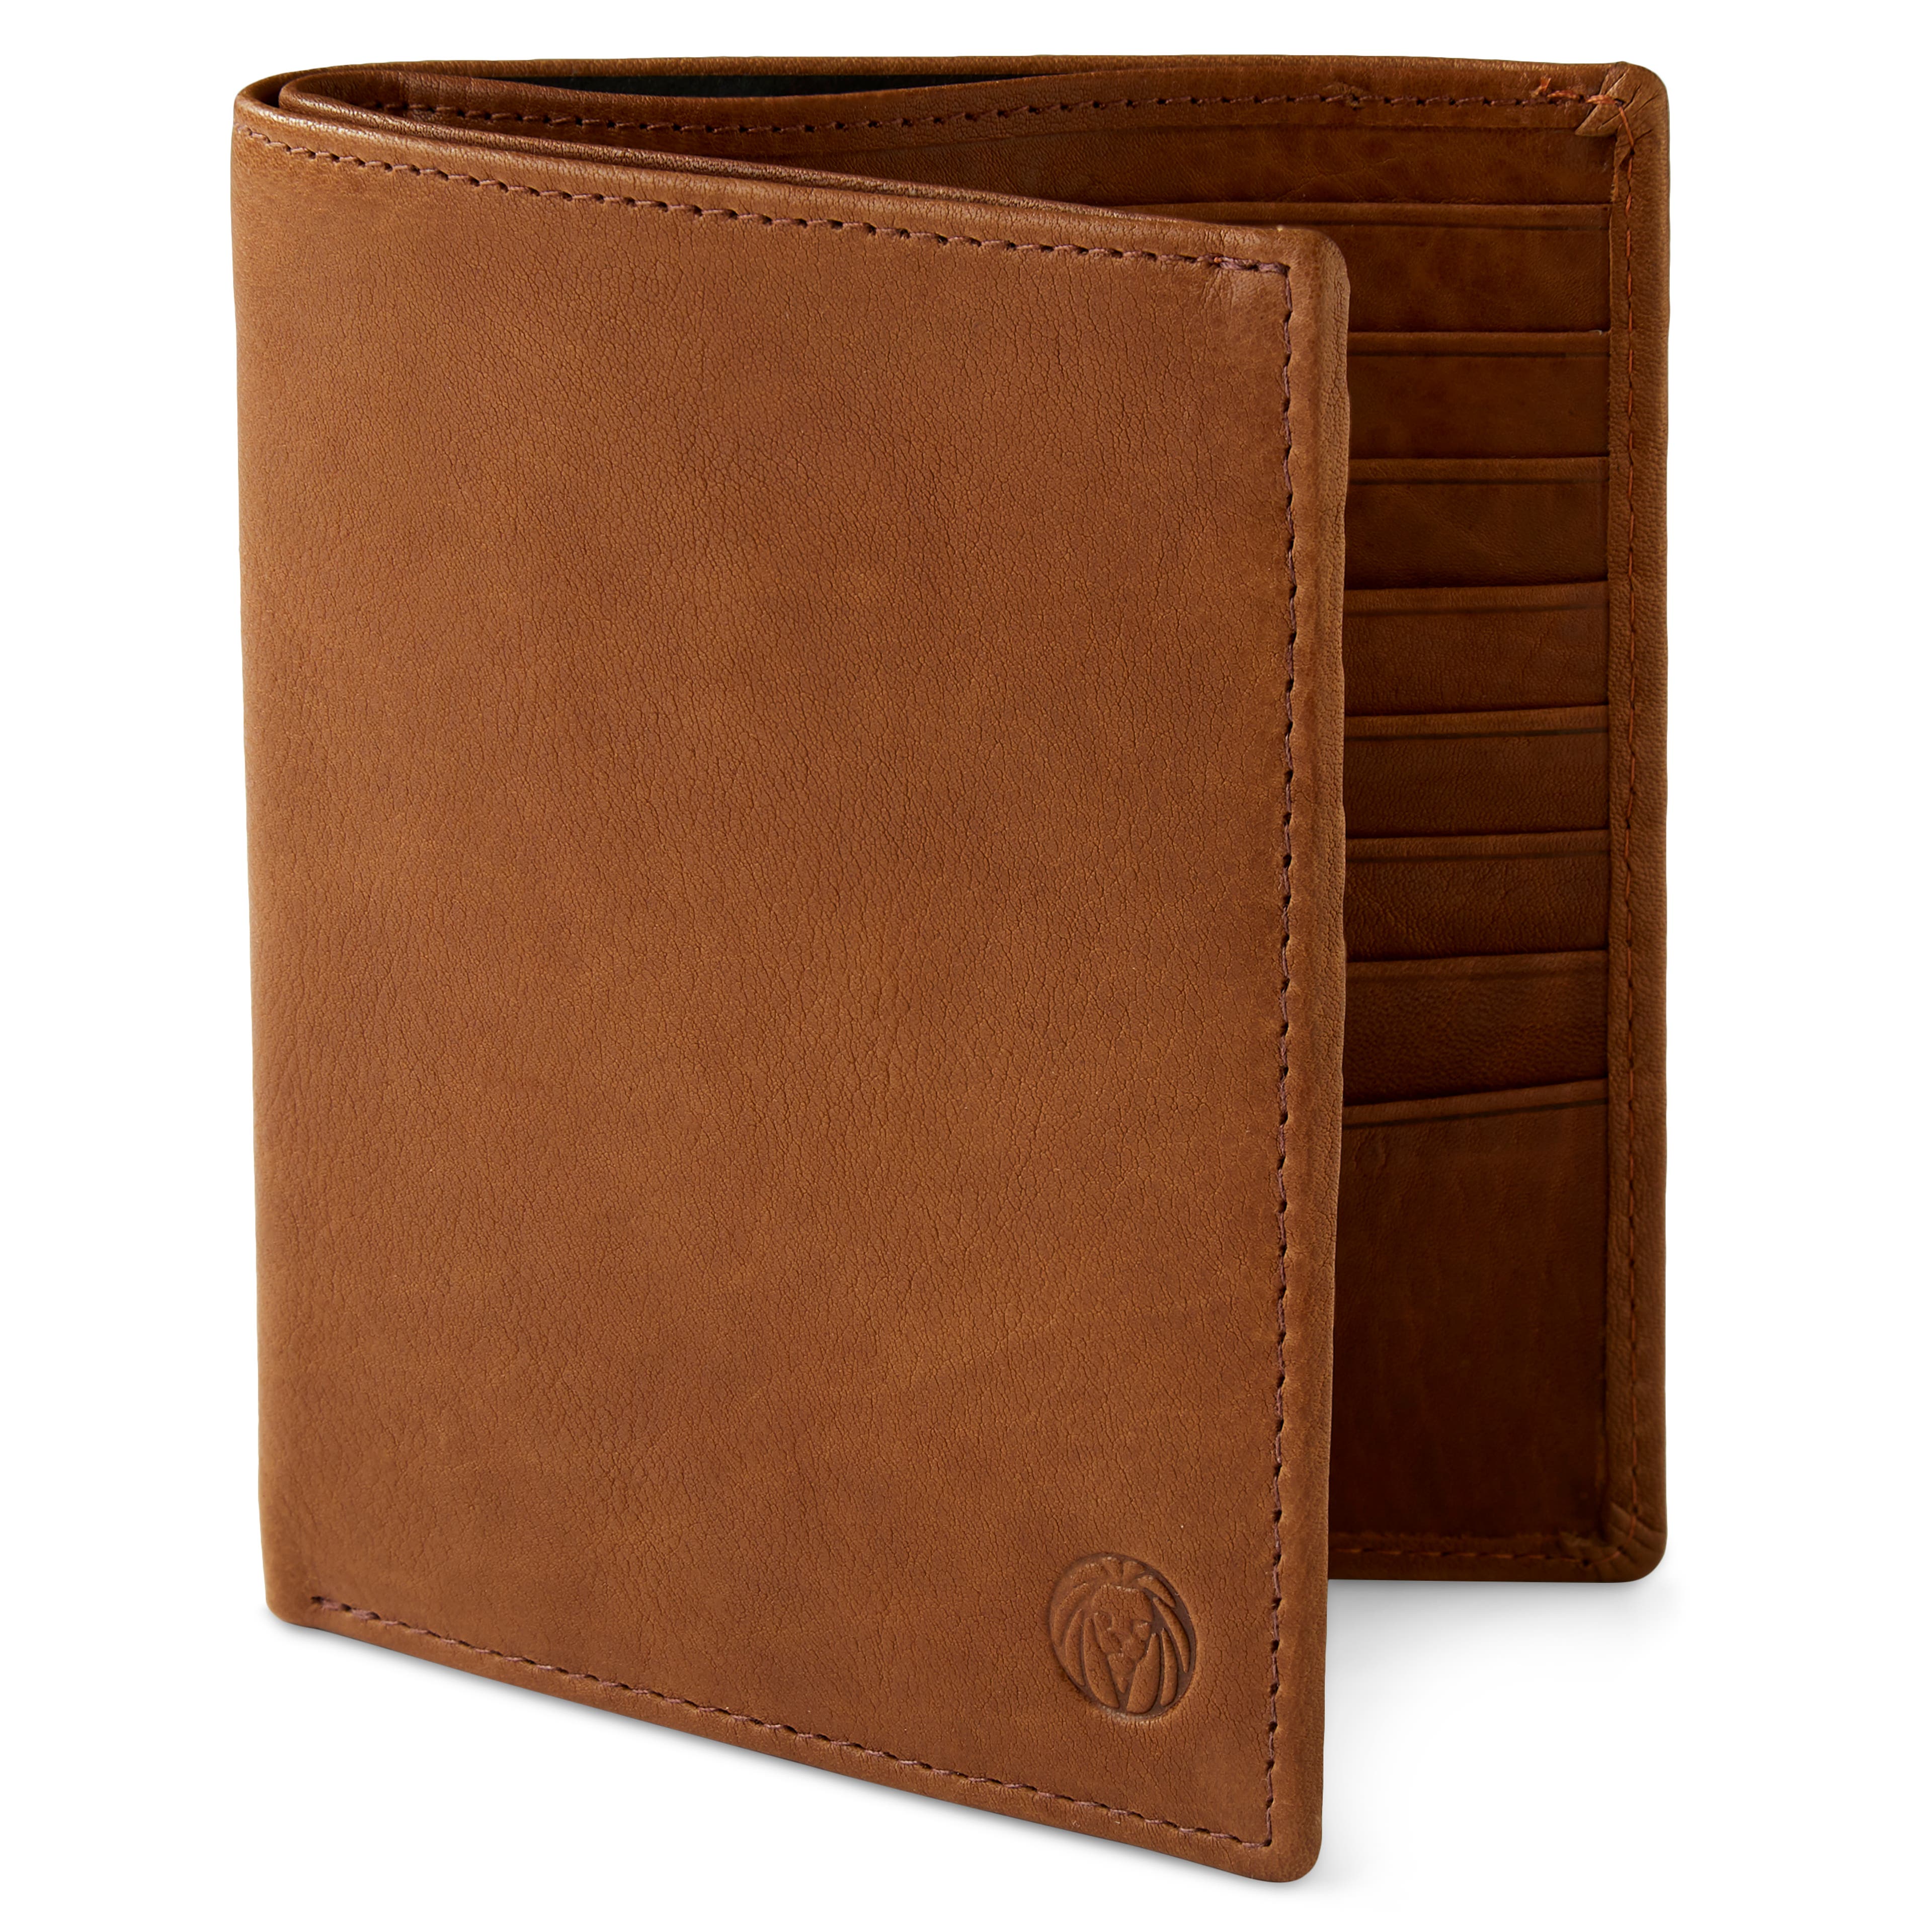 Cambodia 13 Slot Tan RFID Leather Wallet